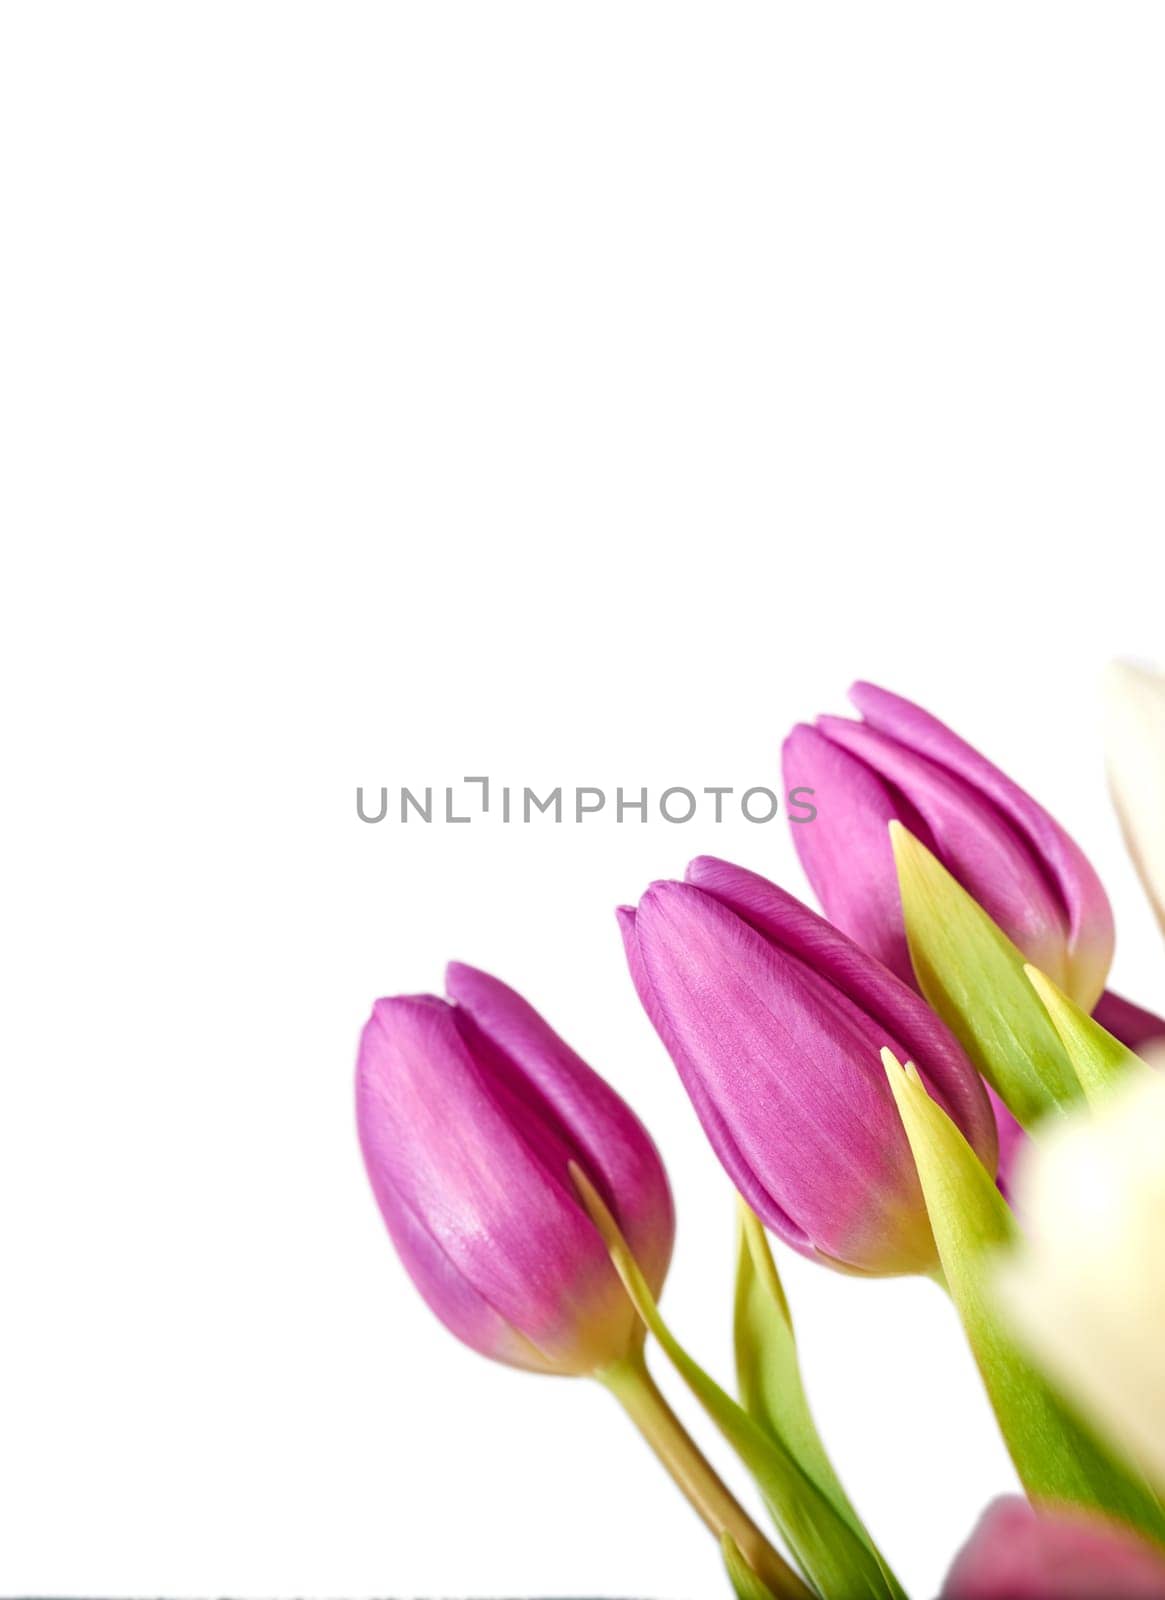 Flowers, tulips and pink in studio by white background, blossom and peace or floral with greenery. Plant, petal and mockup for decoration, creativity and wallpaper or screensaver with natural color.